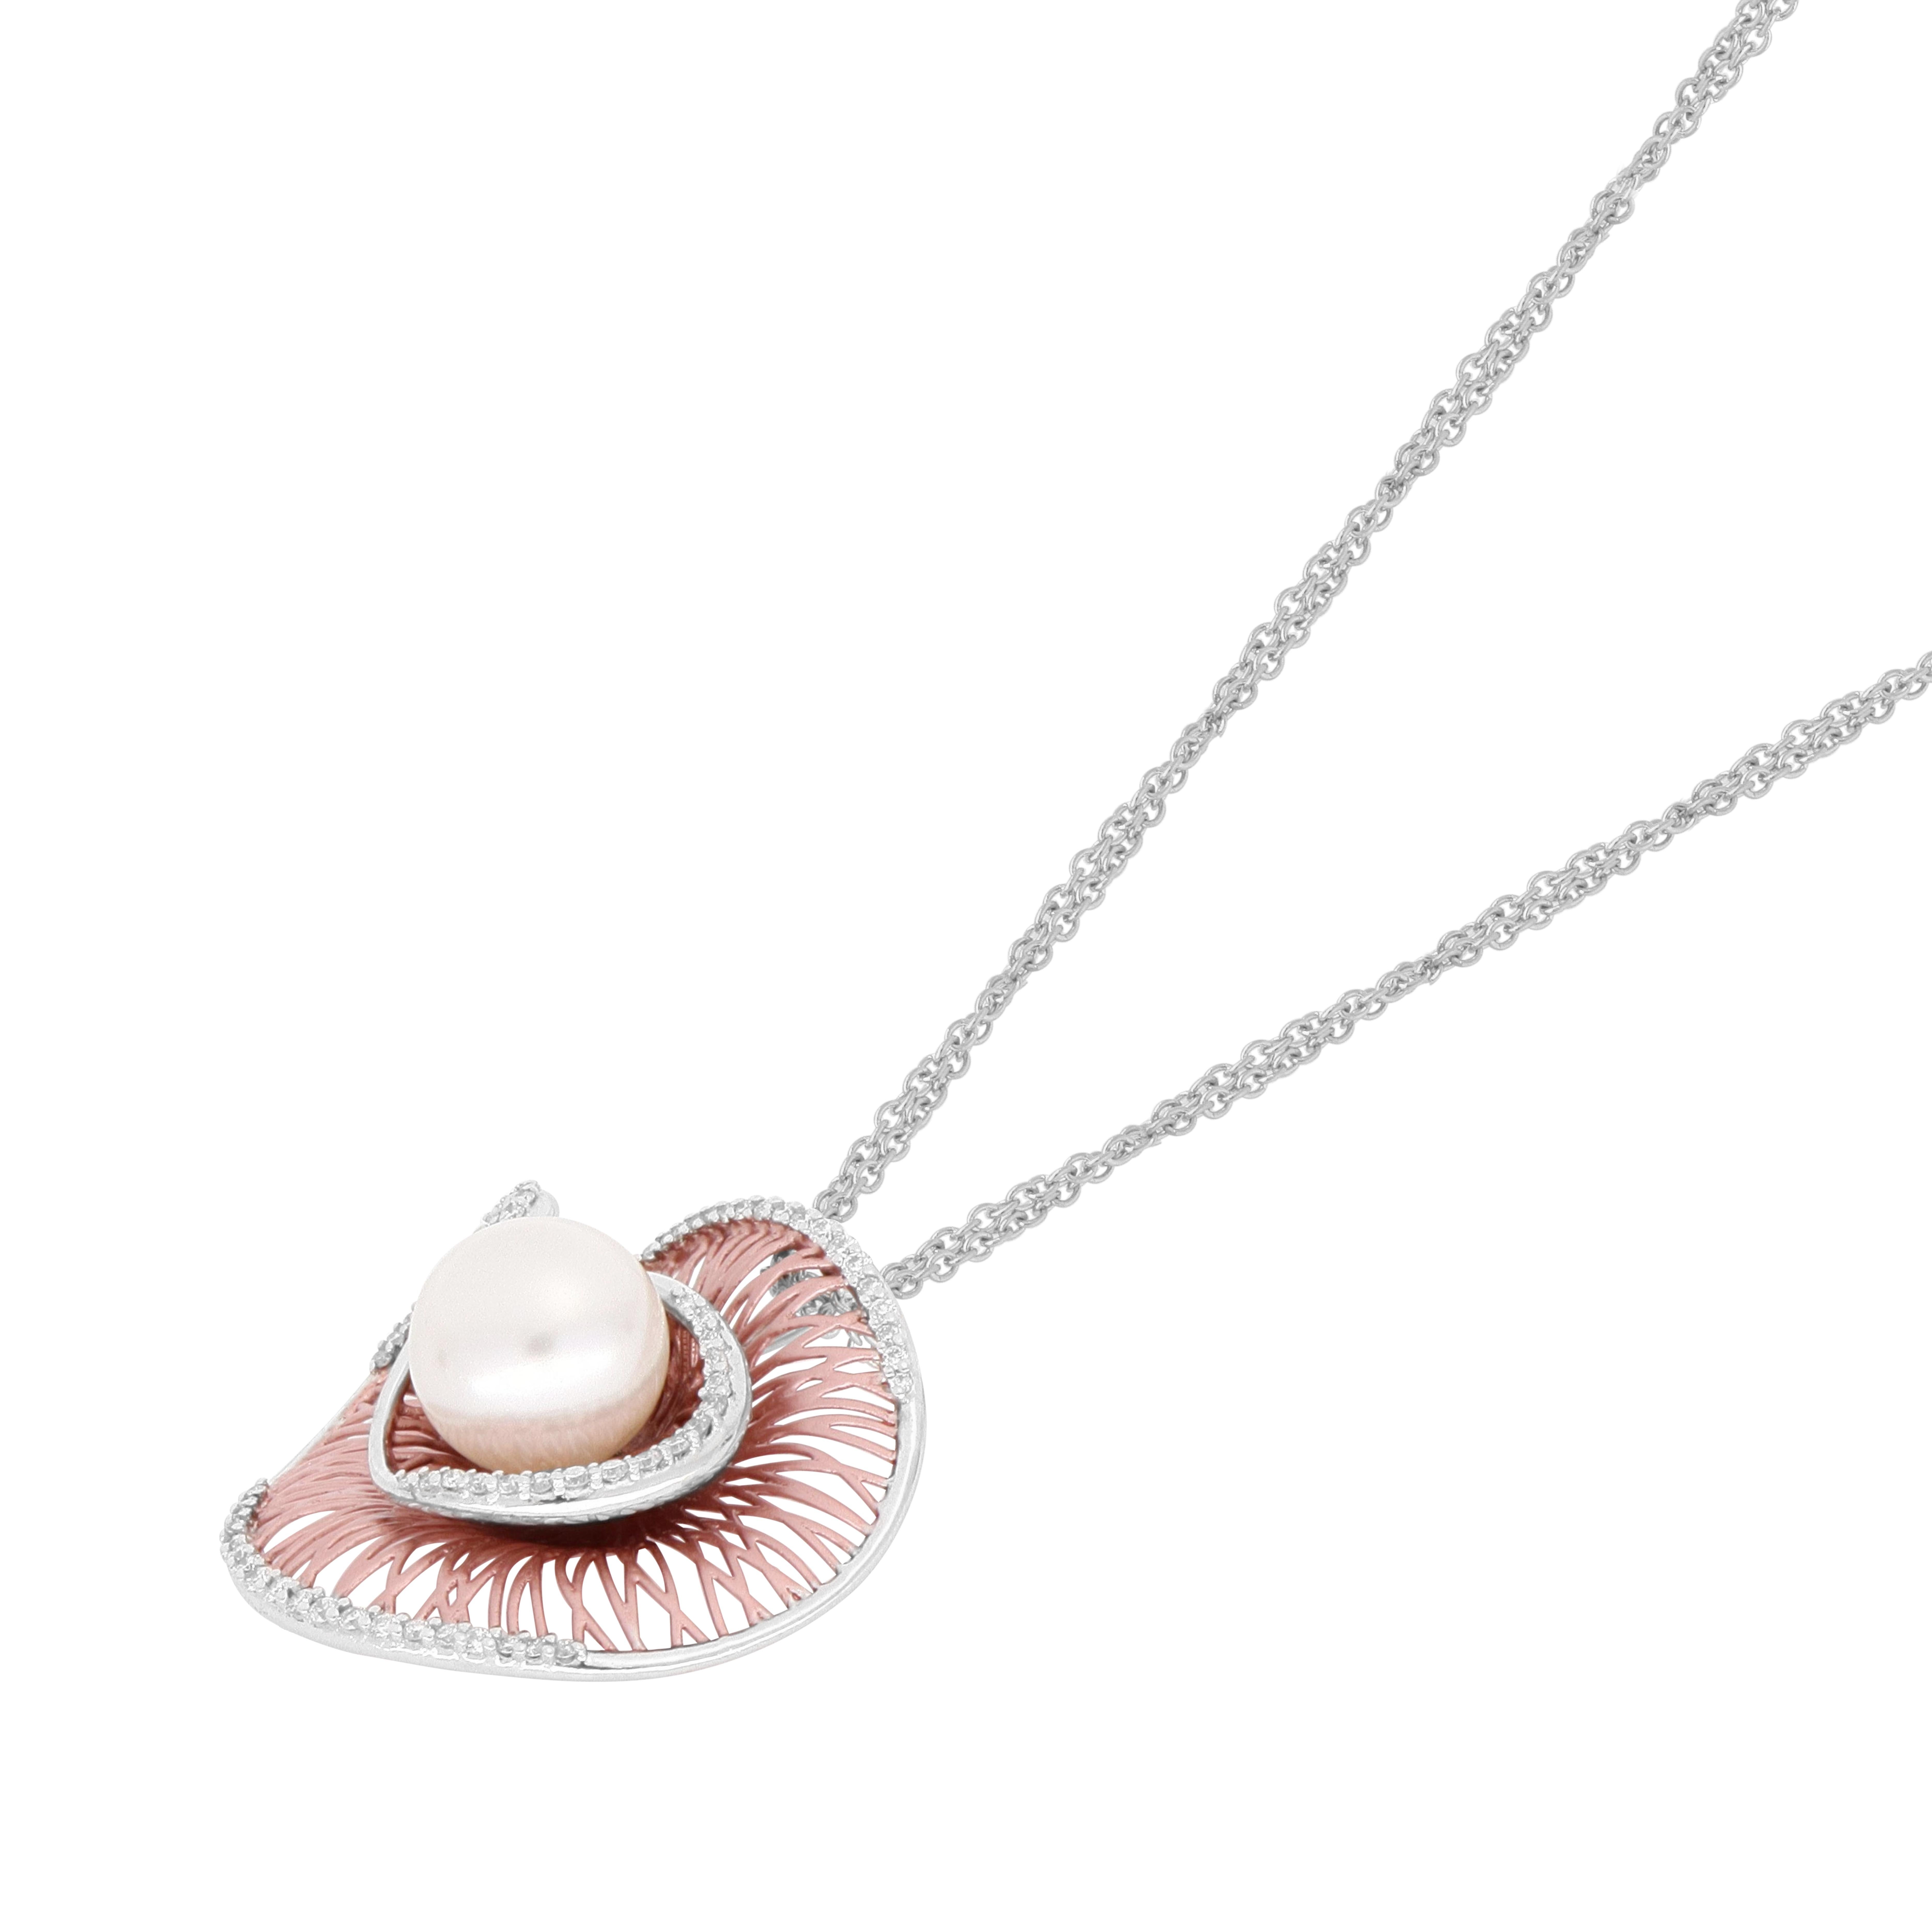 Representing a mollusk and its pearl, this gorgeous design is a tribute to the beauty of sea life. The oldest mention of pearls dates back all the way to 2206 BCE. This shouldn’t sound surprising, as many philosophies value pearls and link them to